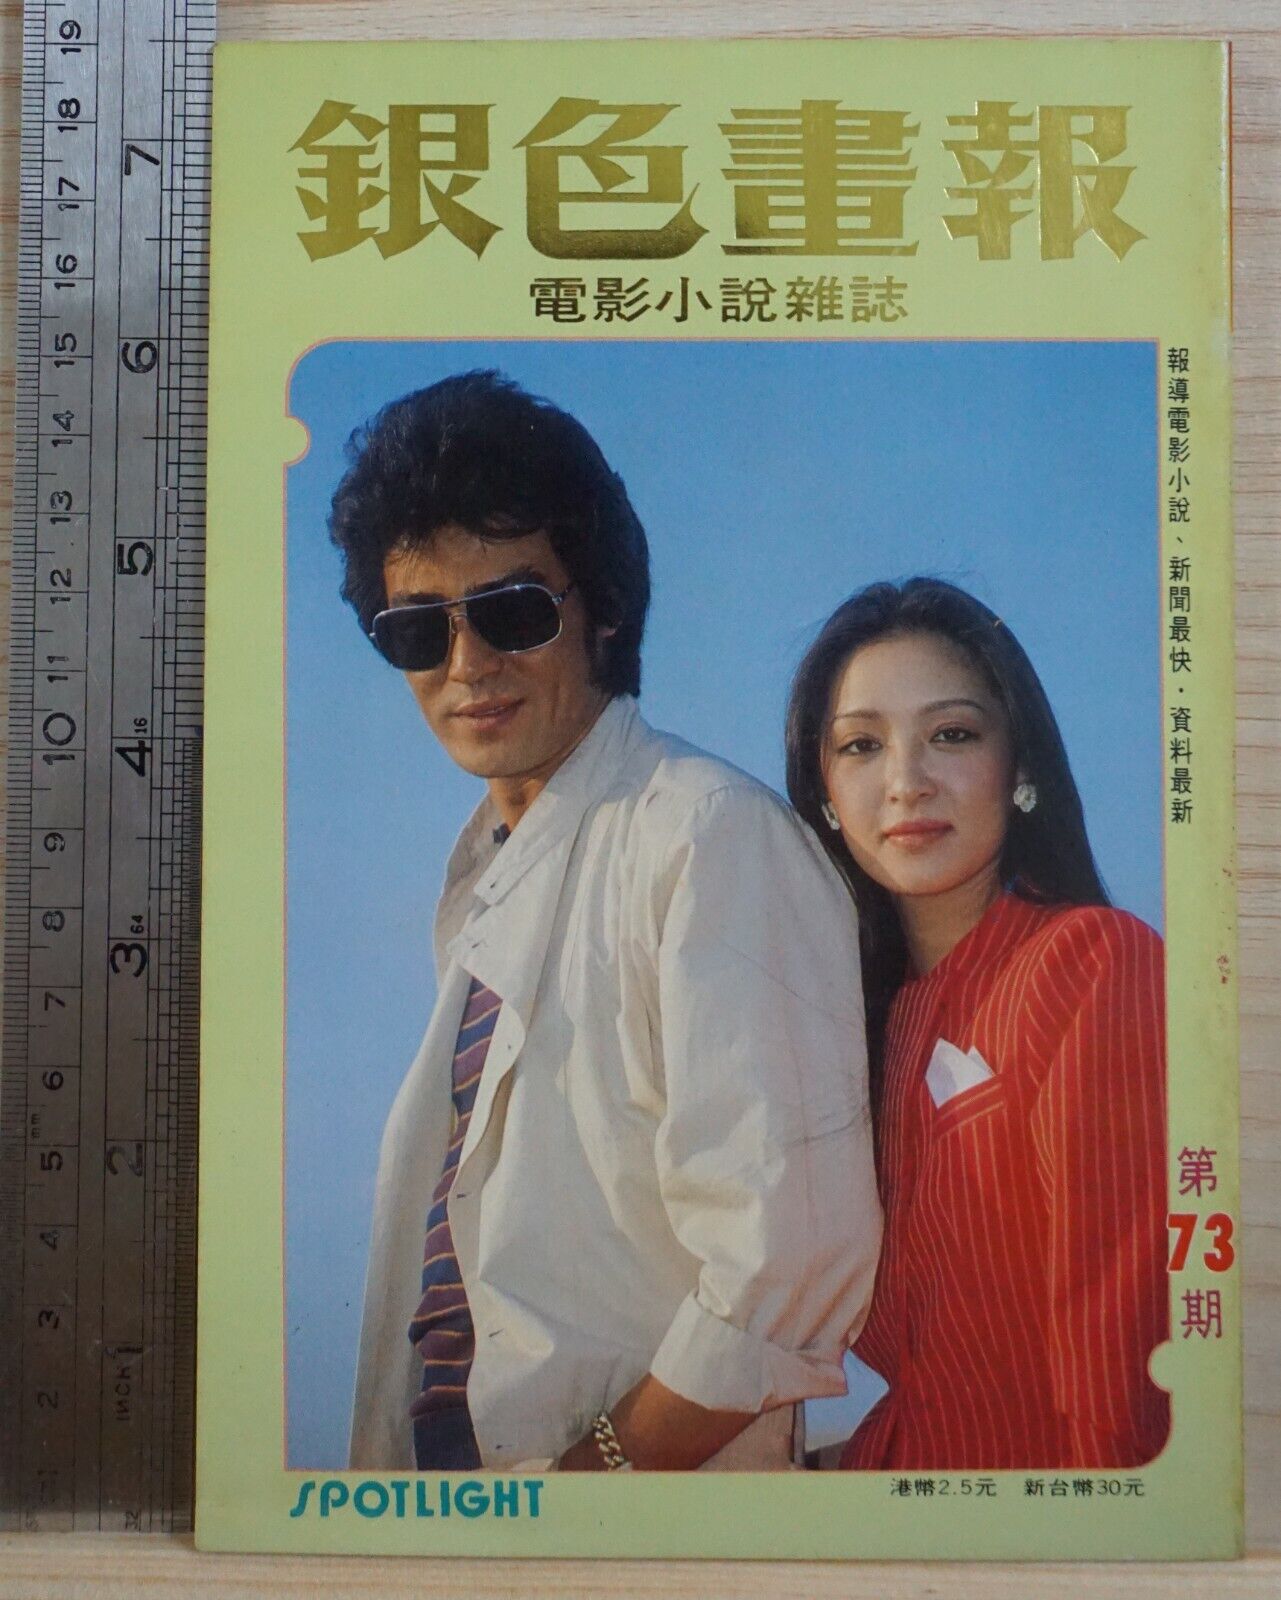 1982 Hong Kong Chinese SPOTLIGHT No.73 銀色畫報 封面：王冠雄，胡茵夢 Direct store Pictorial Large discharge sale